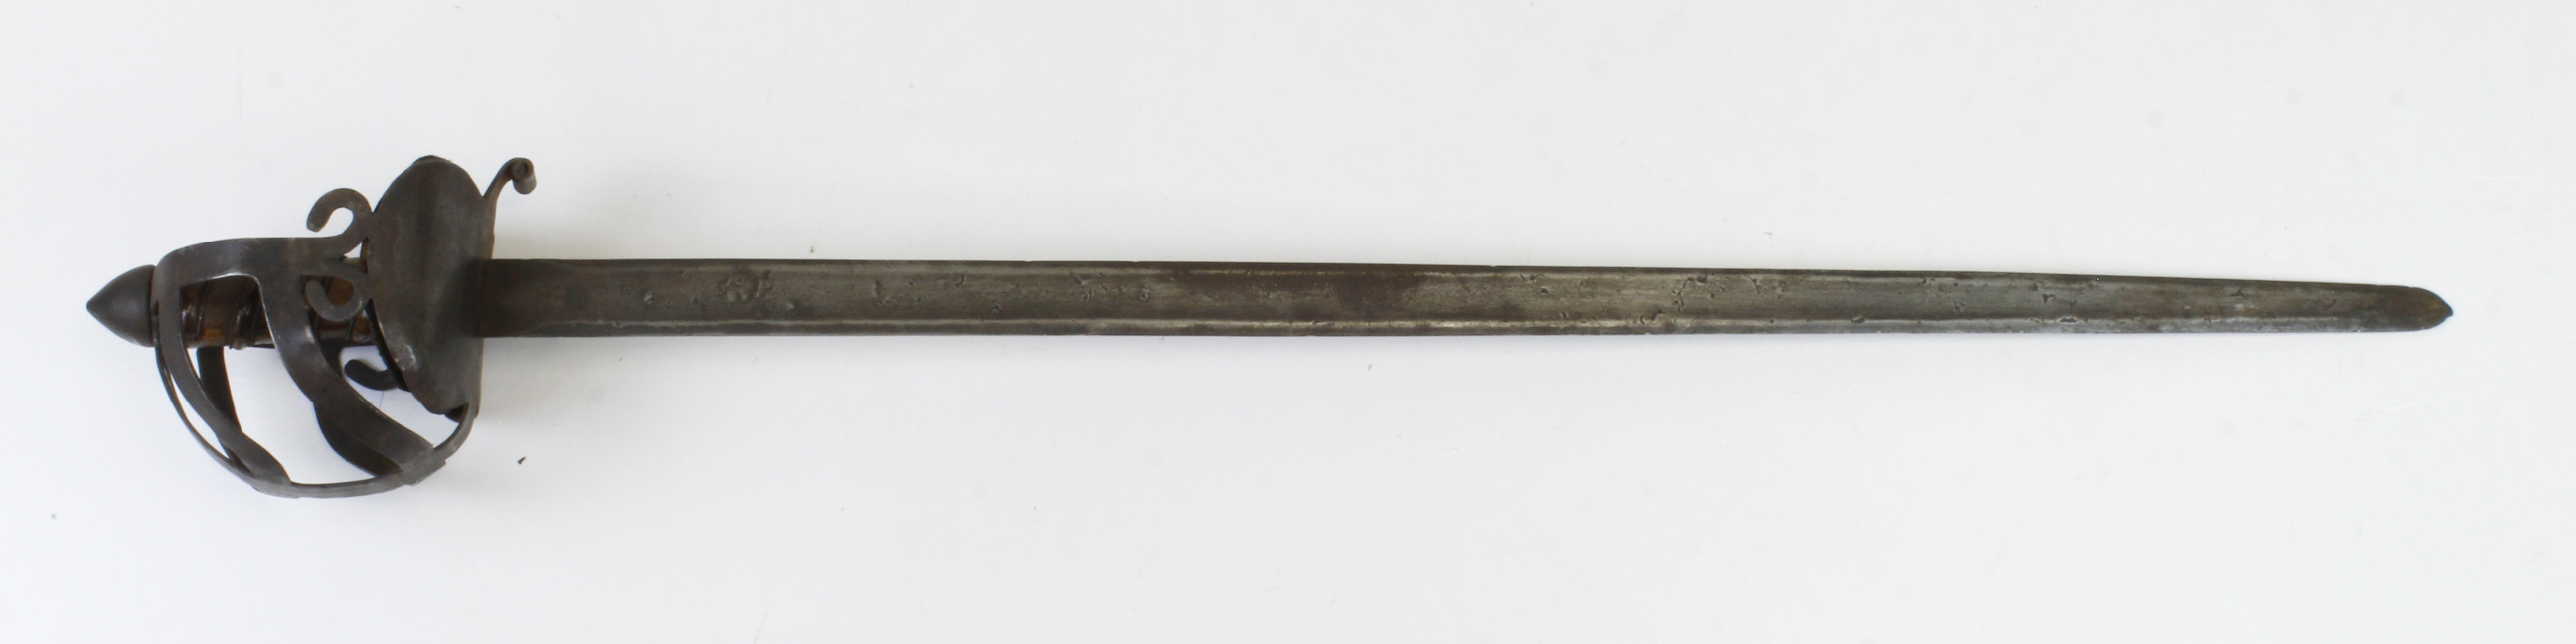 18th Century style Continental Cavalry Troopers sword, age uncertain looks old, but Sold as seen.